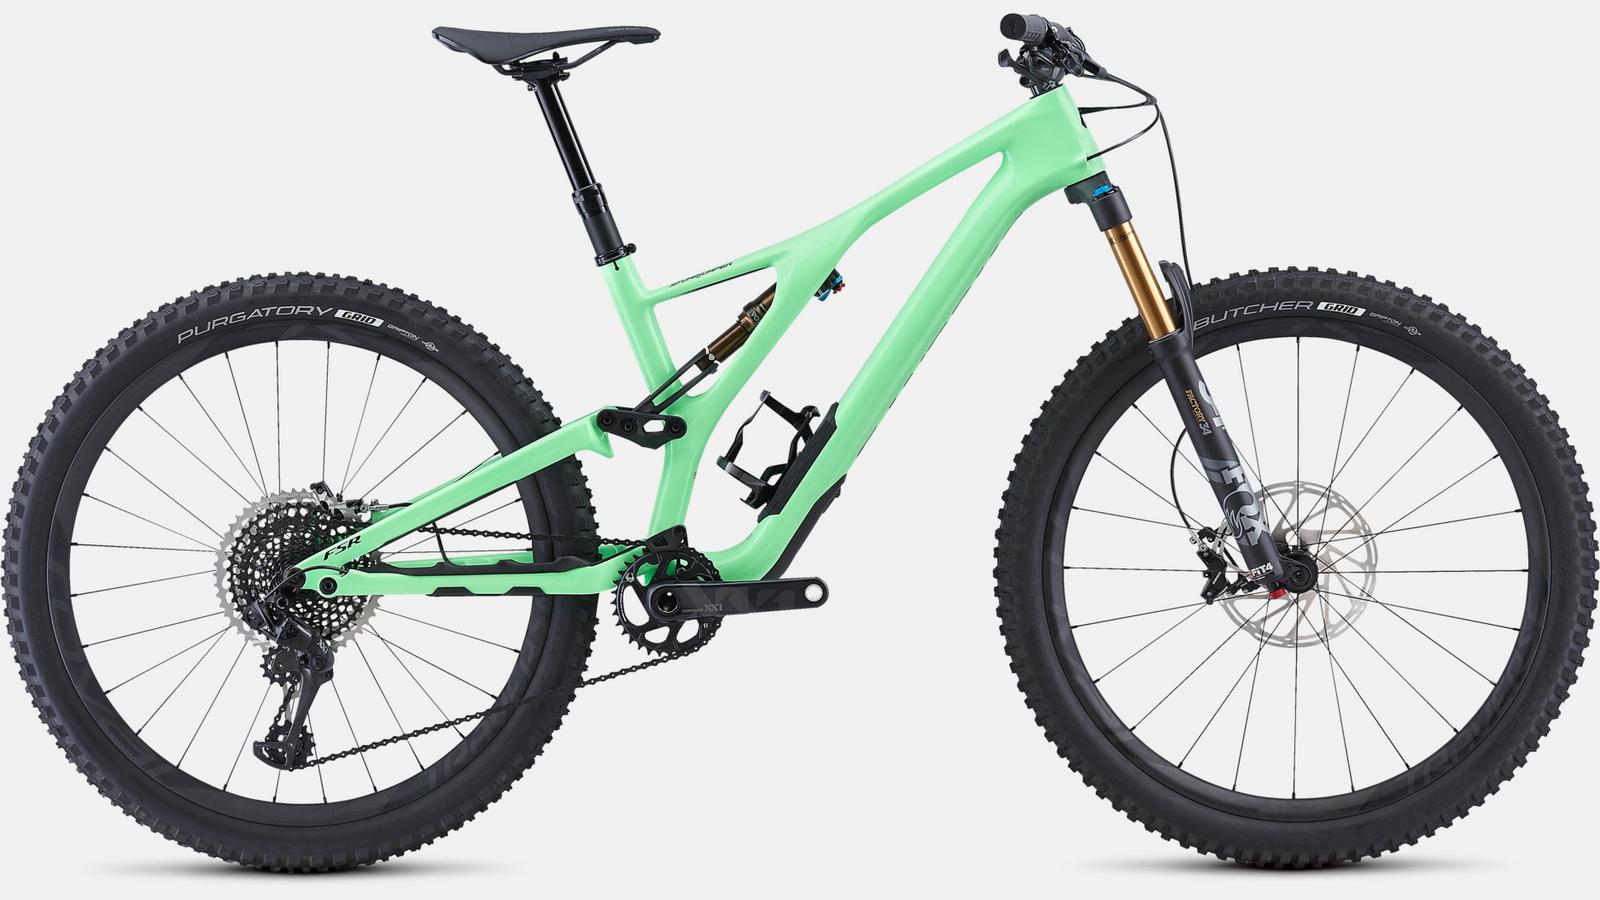 Paint for 2019 Specialized S-Works Stumpjumper ST 27.5 - Gloss Acid Kiwi